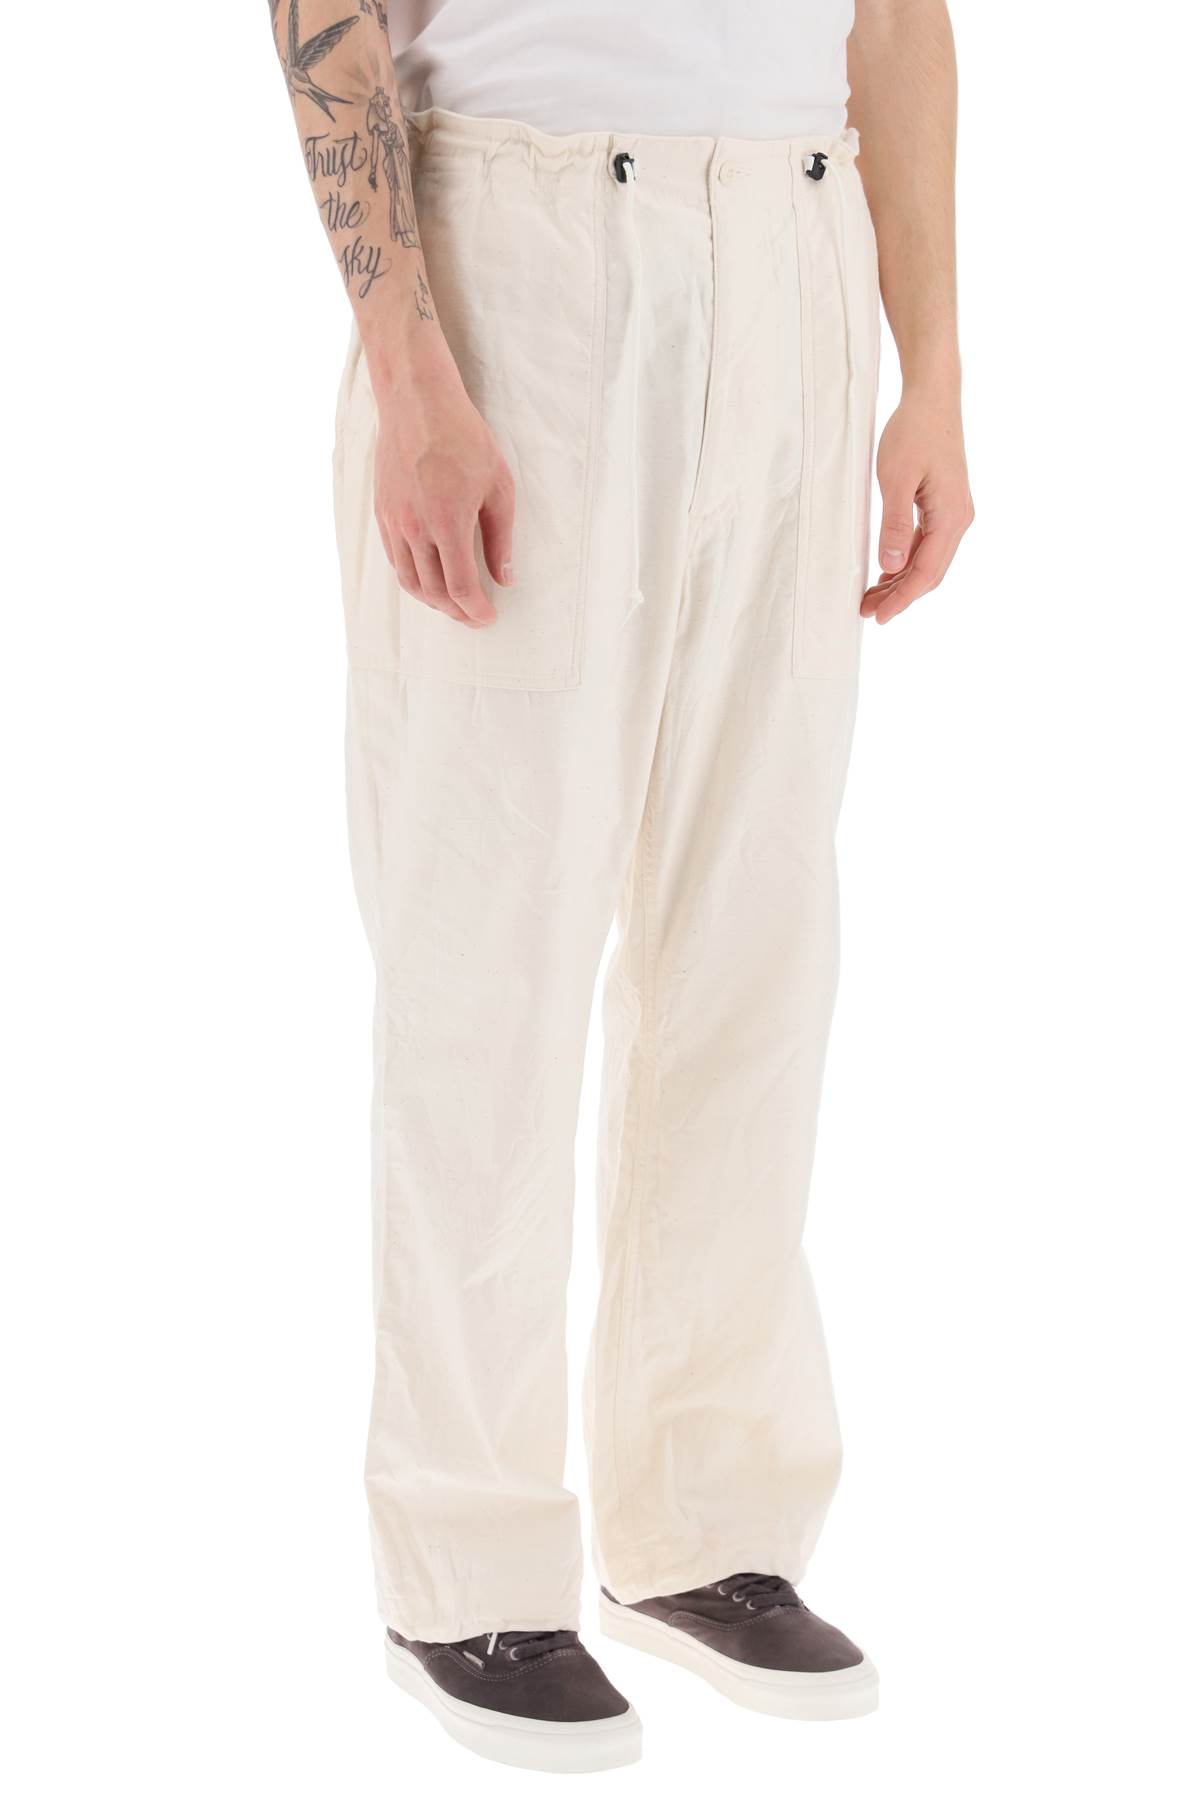 NEEDLES FATIGUE PANTS WITH WIDE LEG